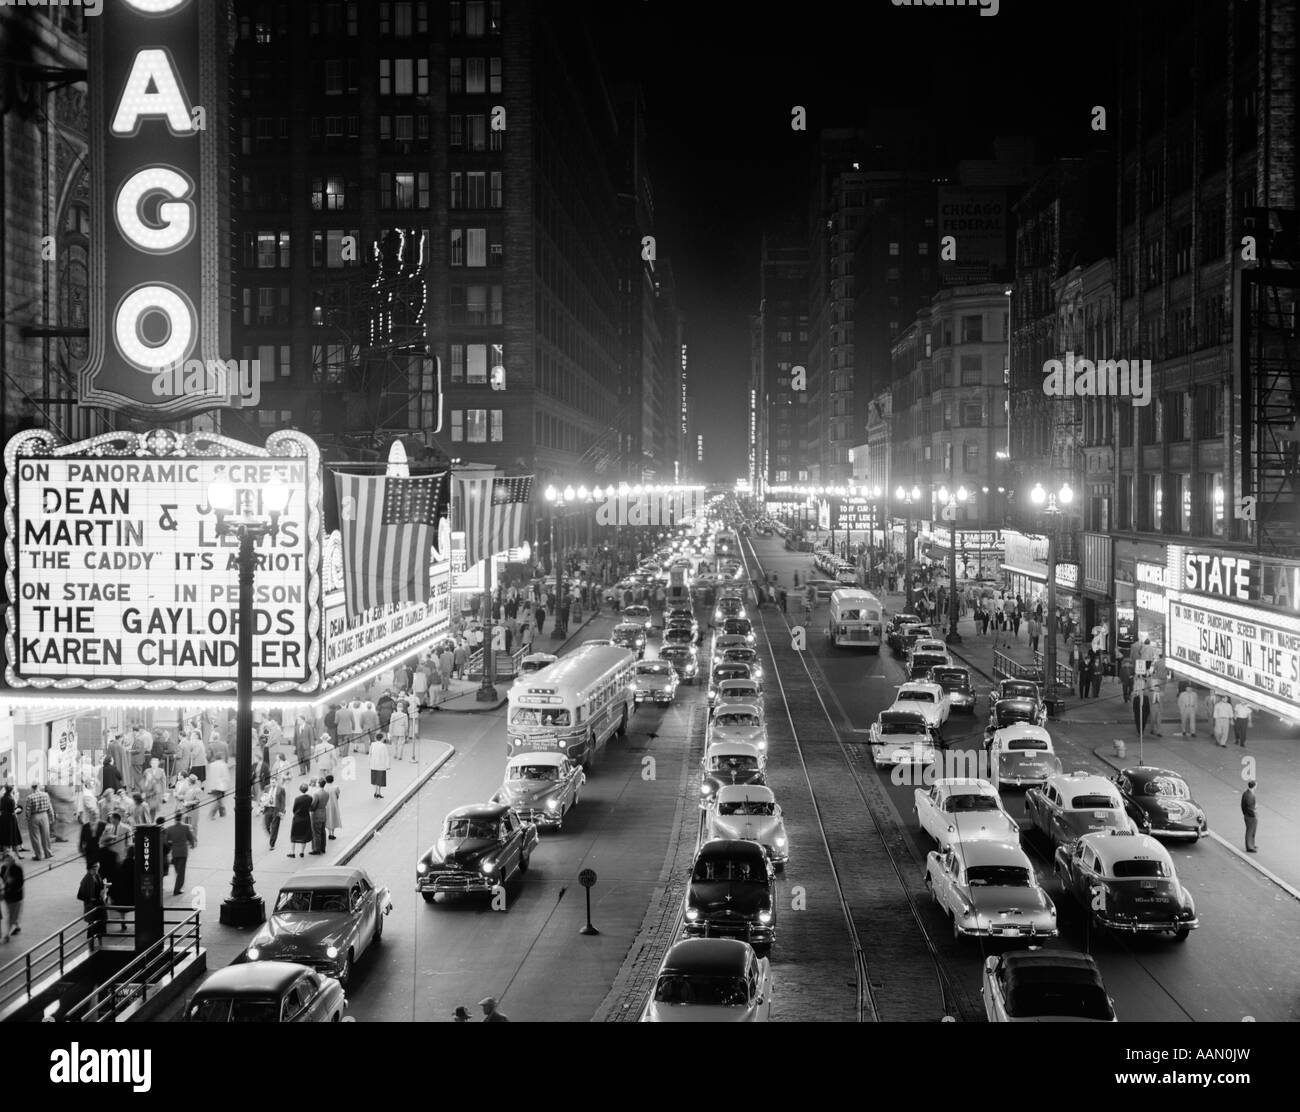 1950s 1953 NIGHT SCENE OF CHICAGO STATE STREET WITH TRAFFIC AND MOVIE MARQUEE WITH PEDESTRIANS ON THE SIDEWALKS Stock Photo